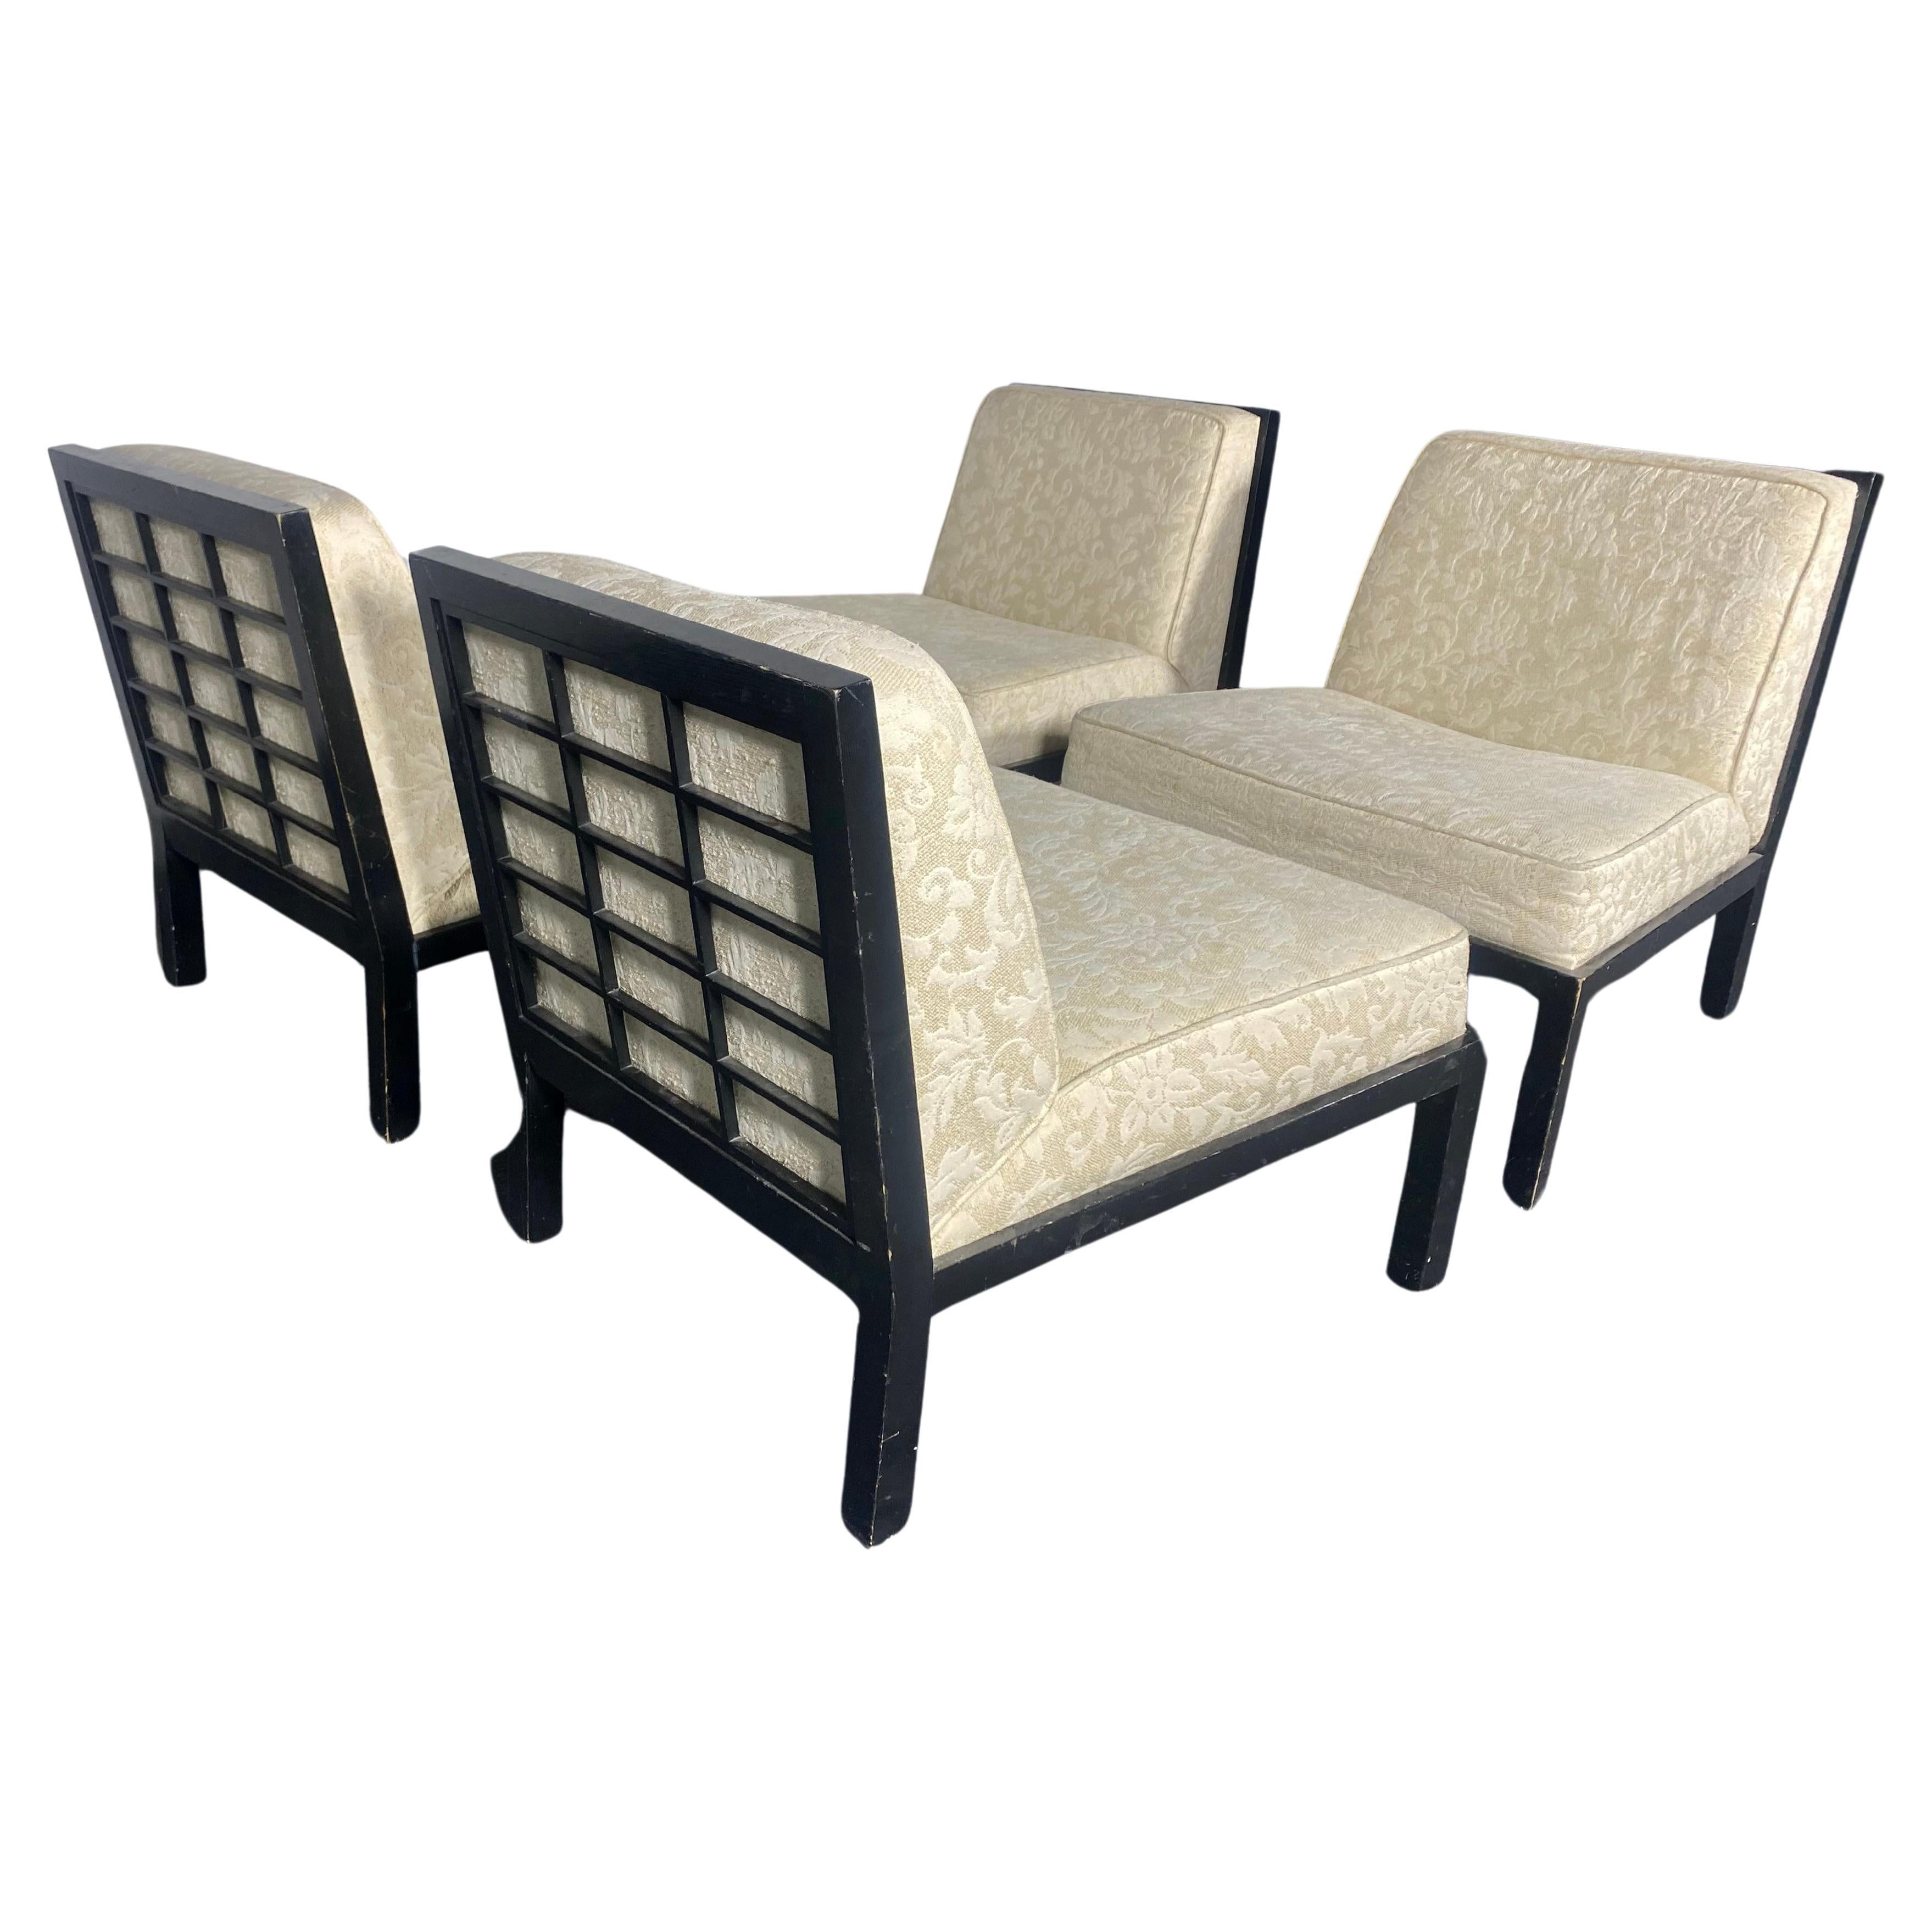  Michael Taylor pour Baker Furniture Co. Slipper Chairs, Classic Modern Designs